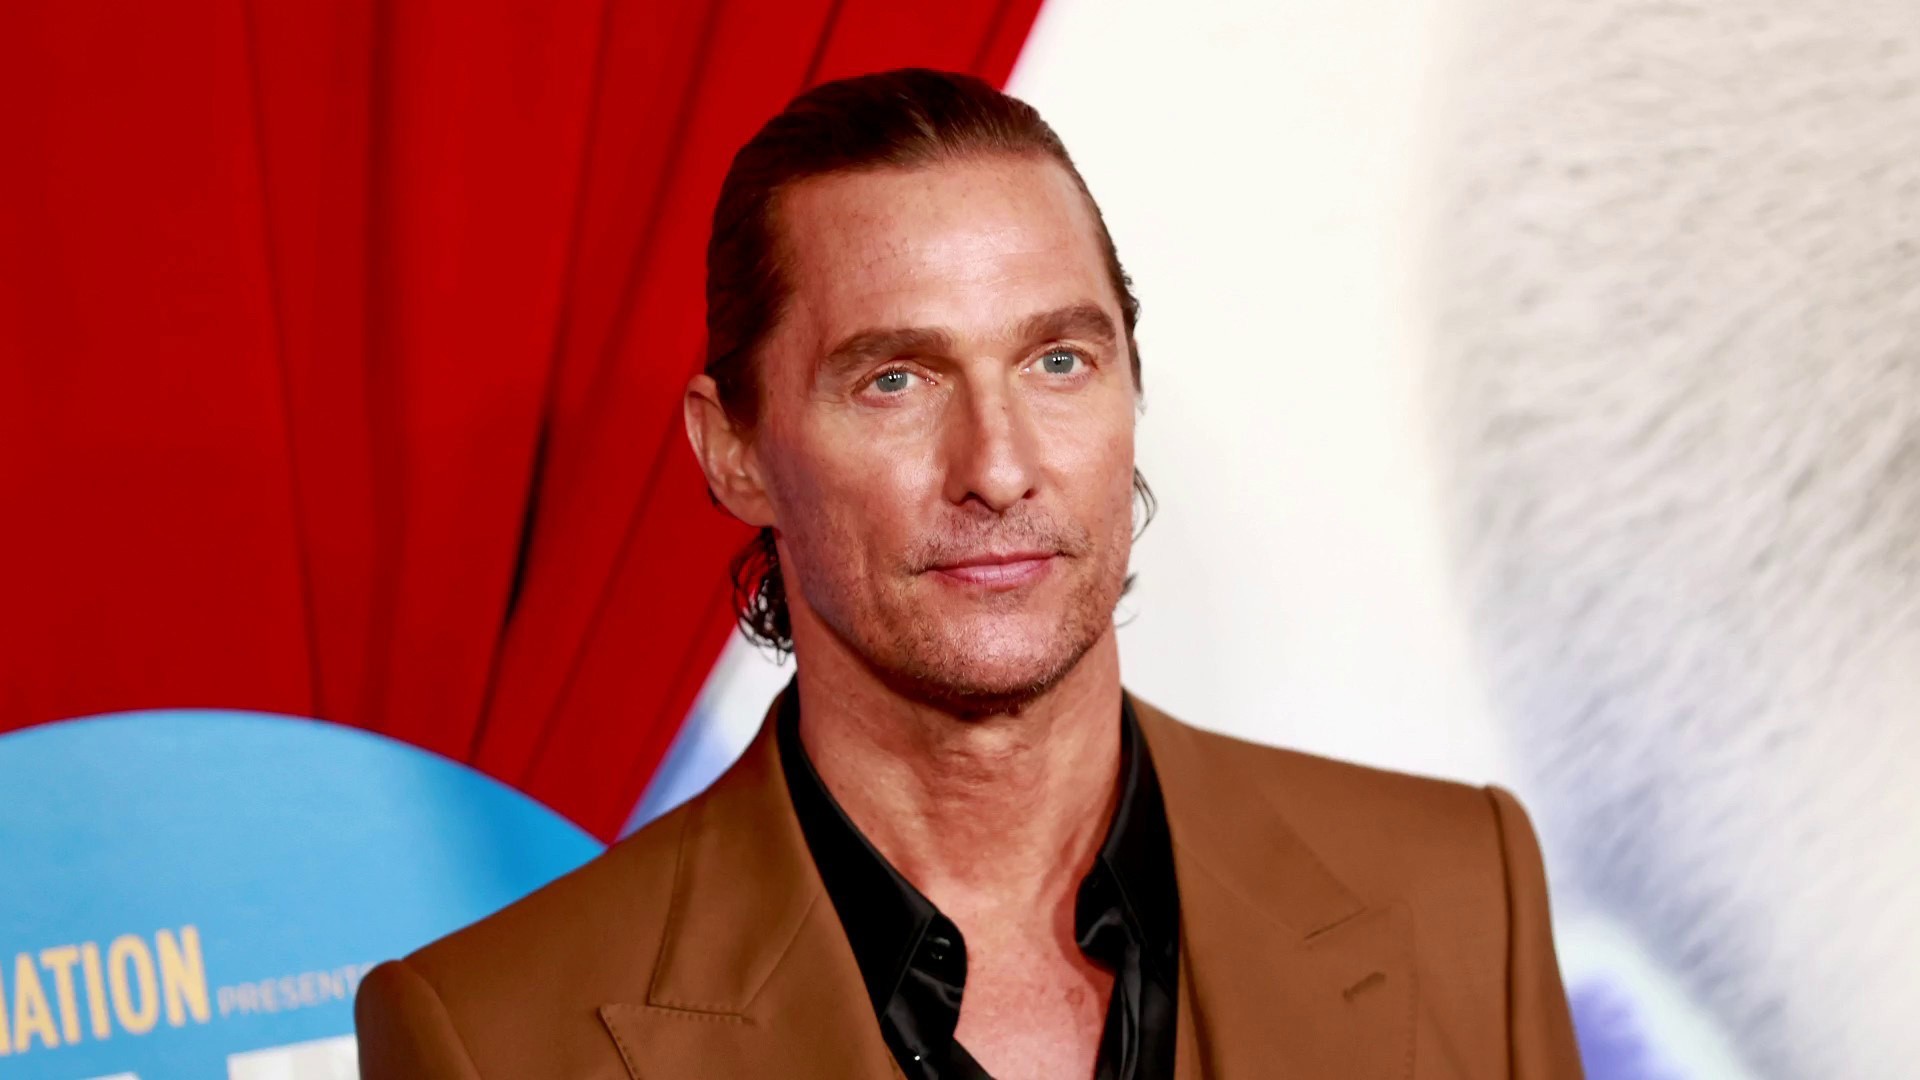 Matthew Mcconaughey Reportedly To Star In 'Yellowstone' Spinoff